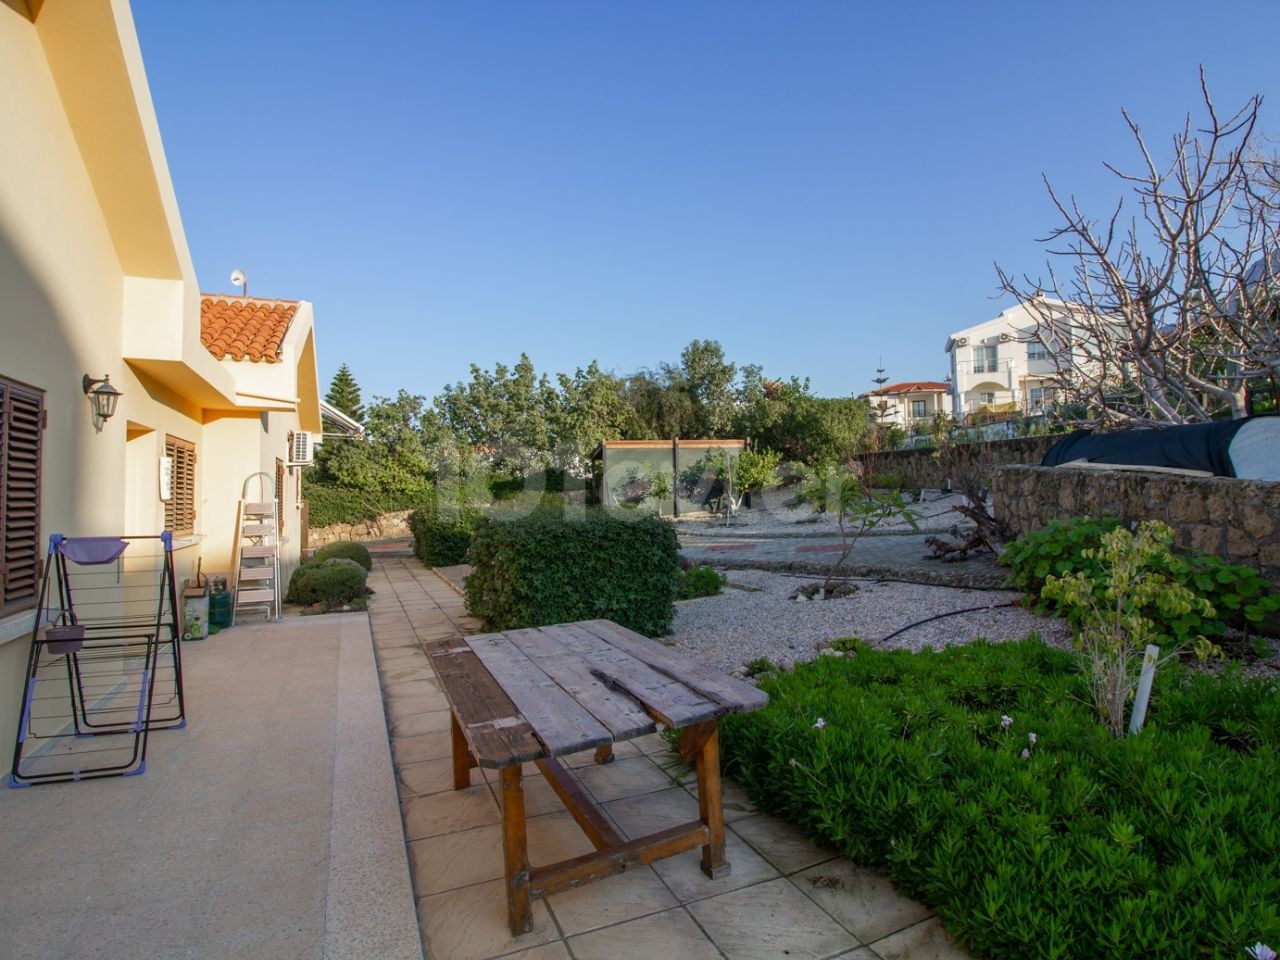 Rare Opportunity to Purchase This Well Presented 3 Bedroom Bungalow  with Private Pool - Set in 1 Donum of Land in this Popular Cypriot Village of Catalkoy